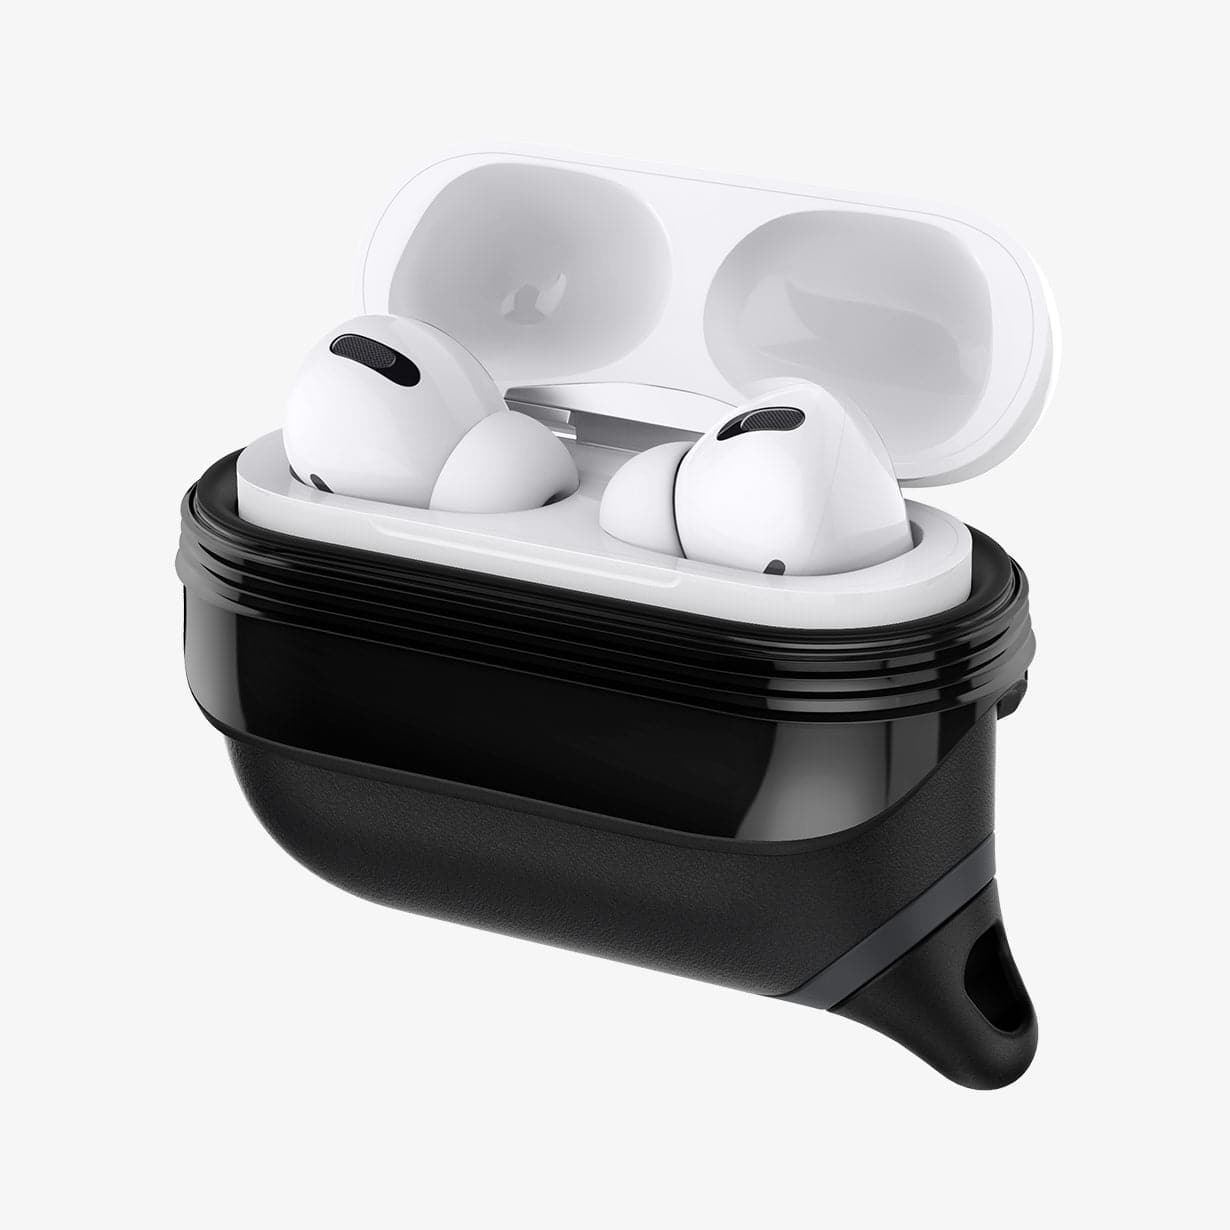 ASD00542 - Apple AirPods Pro / AirPods Pro 2 Case Slim Armor IP in black showing the front and side with two flaps pulled down with AirPods inside